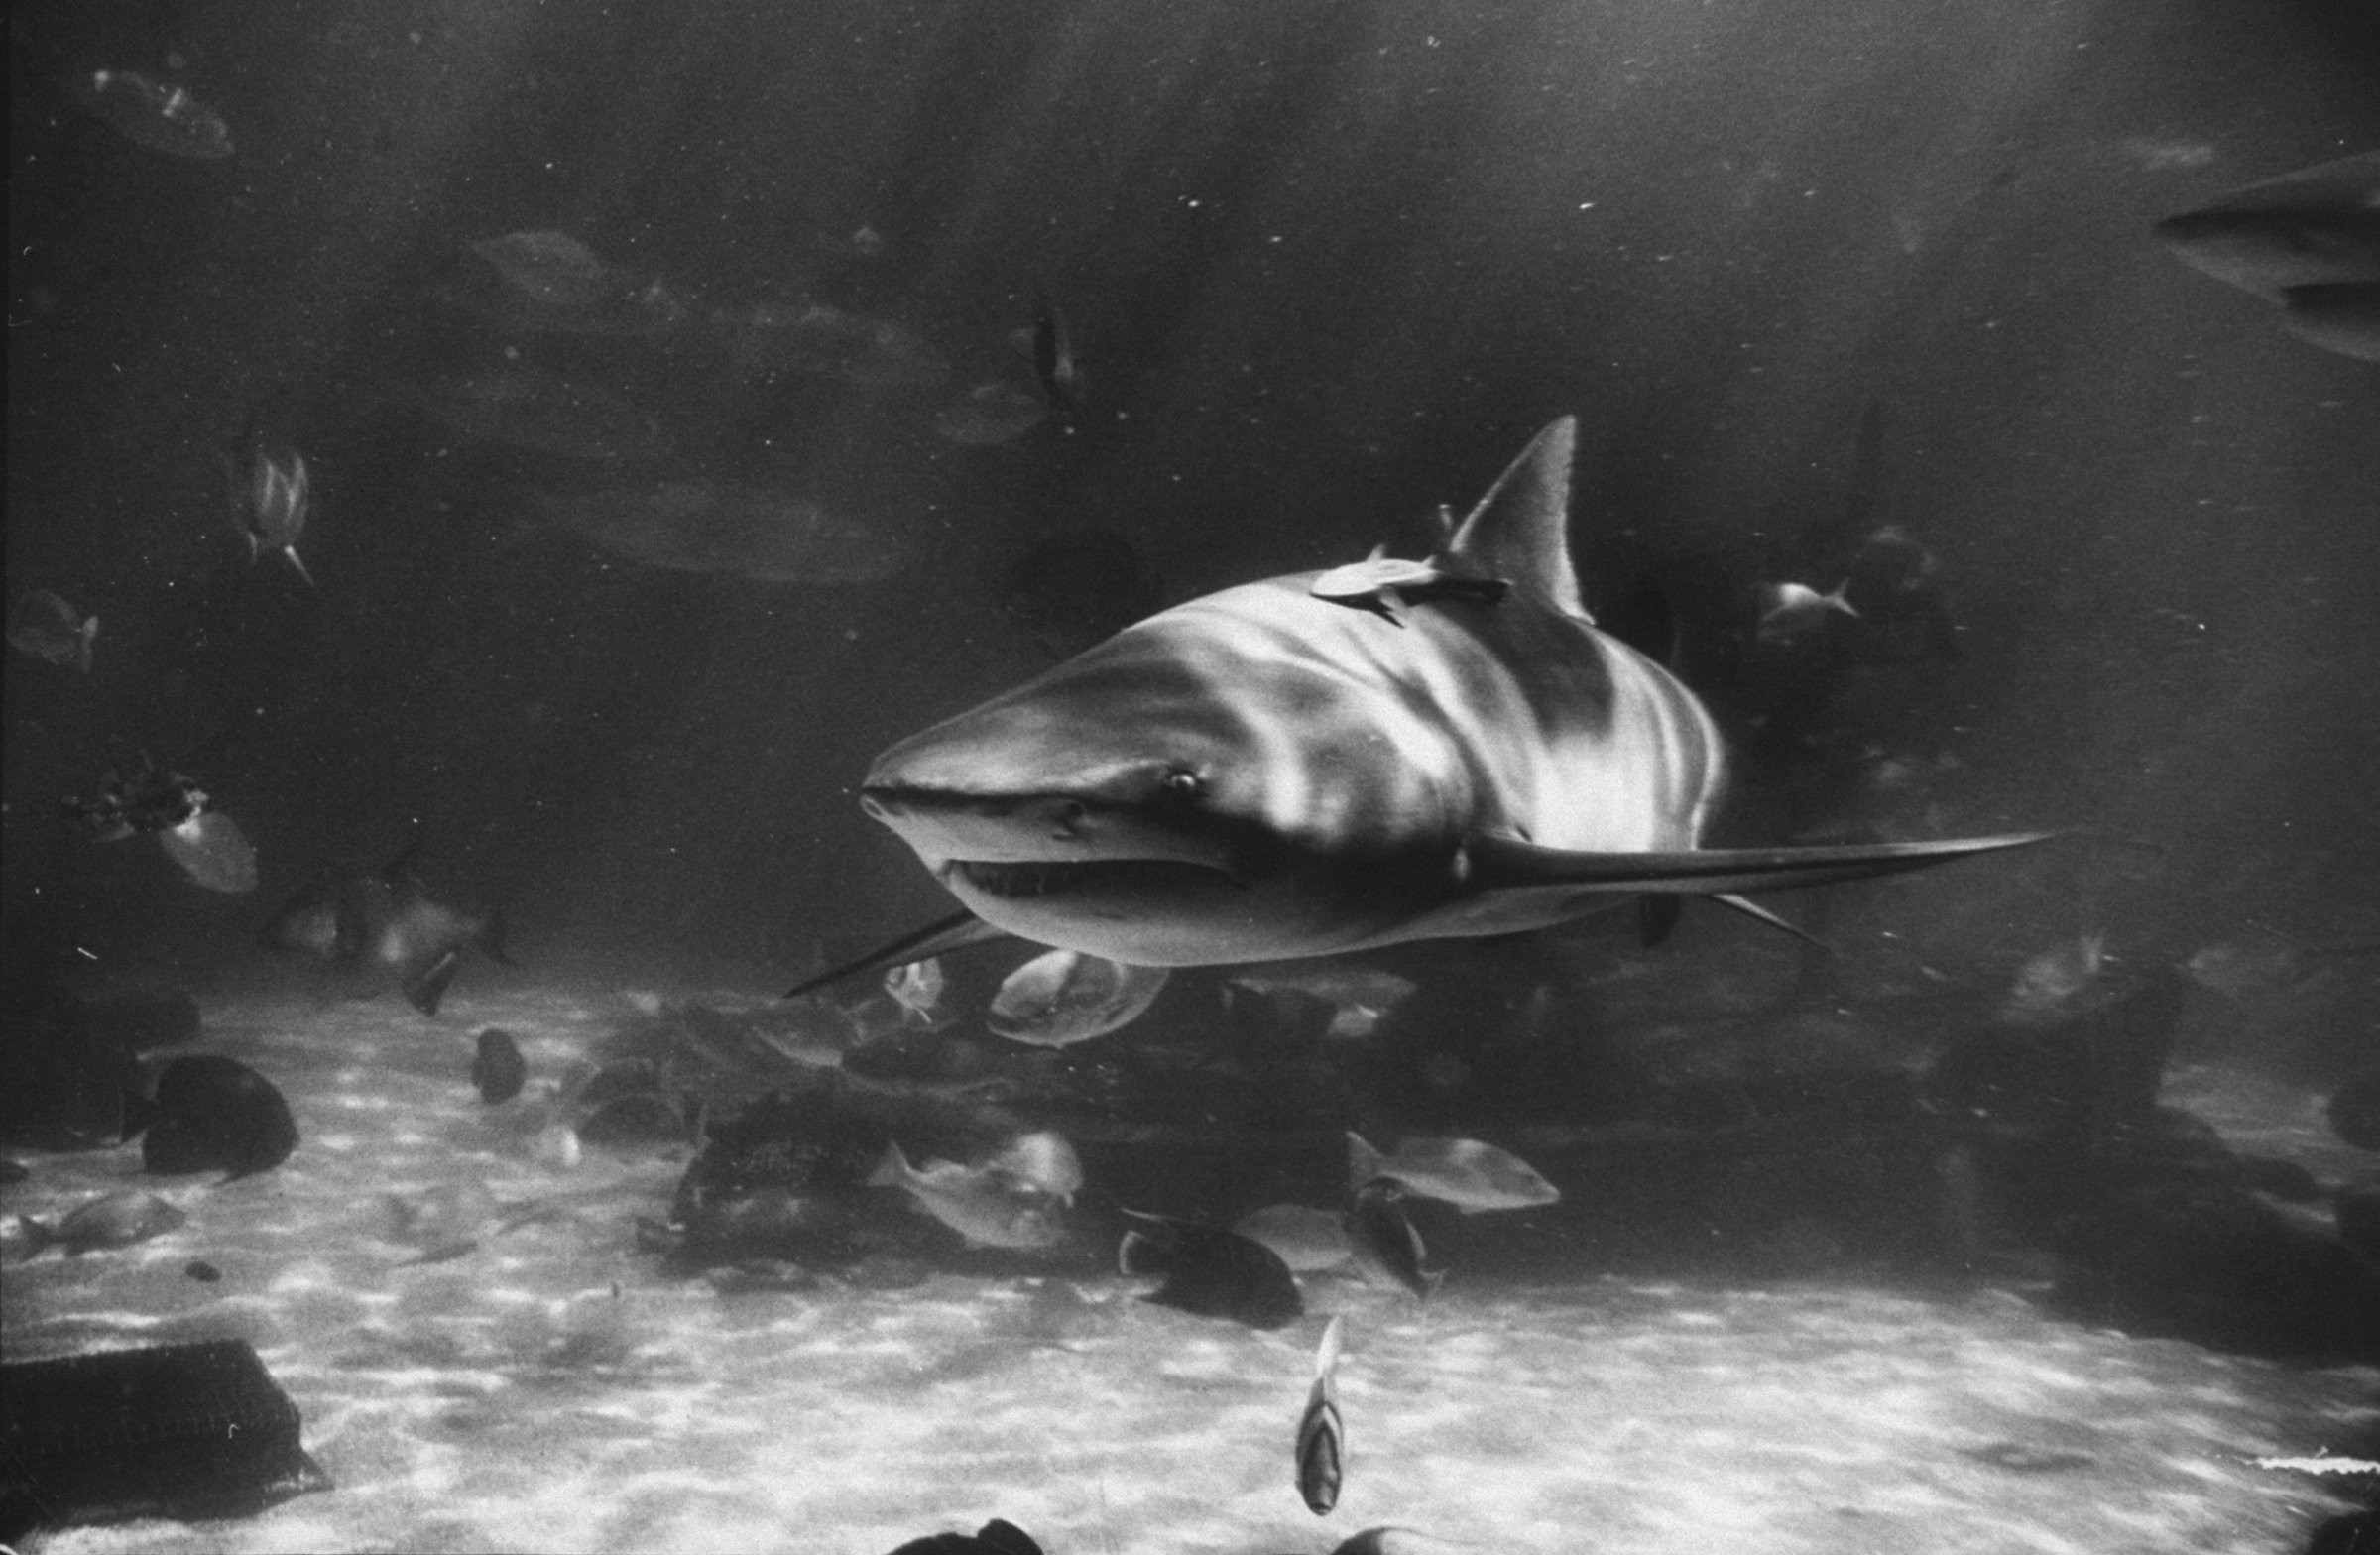 Lemon shark, a captive in Florida's Marineland, is one of a small, pig-eyed species, seven to 11 feet long, which often haunts docks and beaches at night.